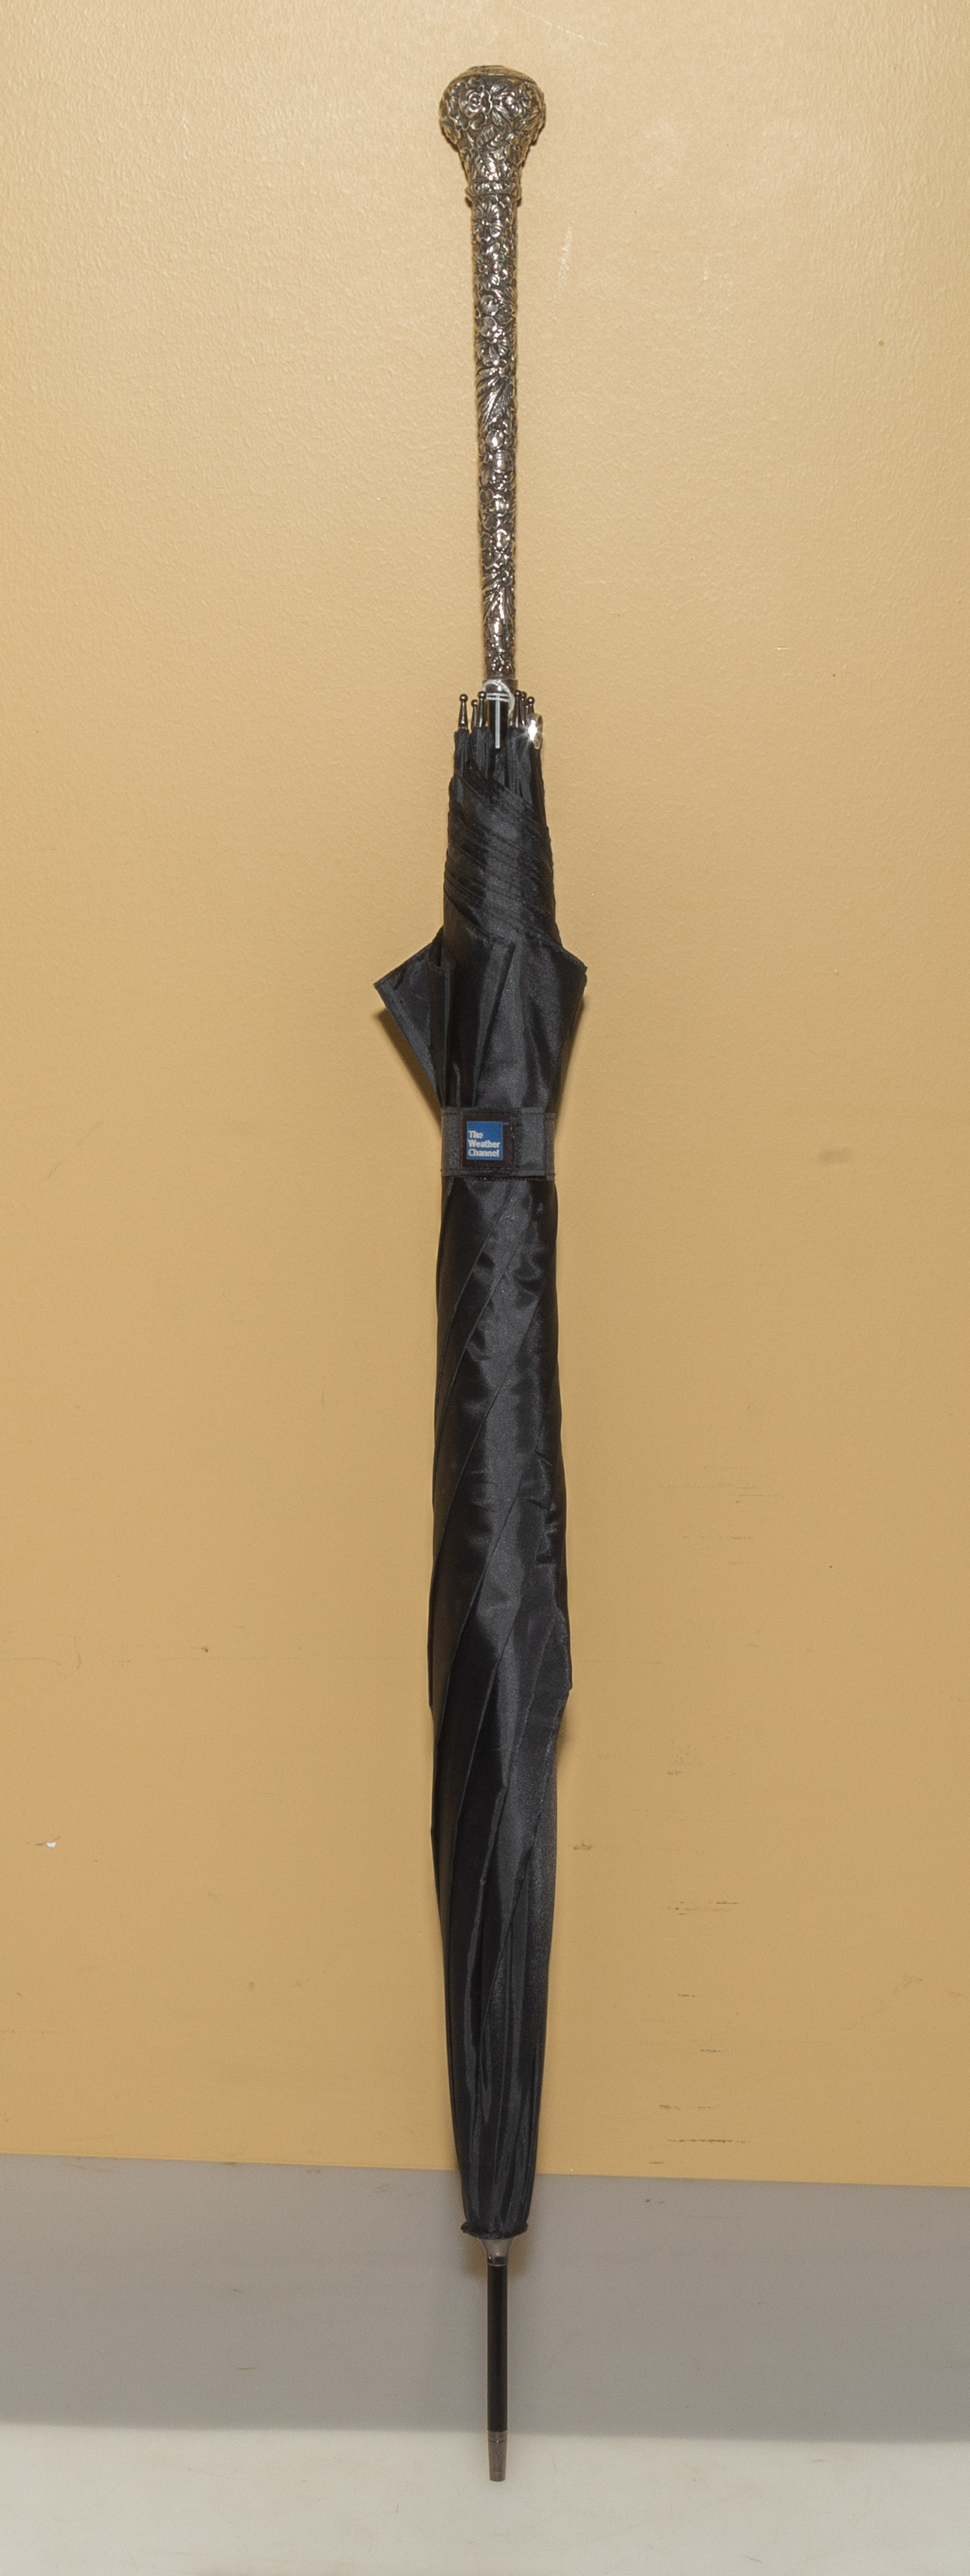 STERLING REPOUSSE HANDLE UMBRELLA 335633